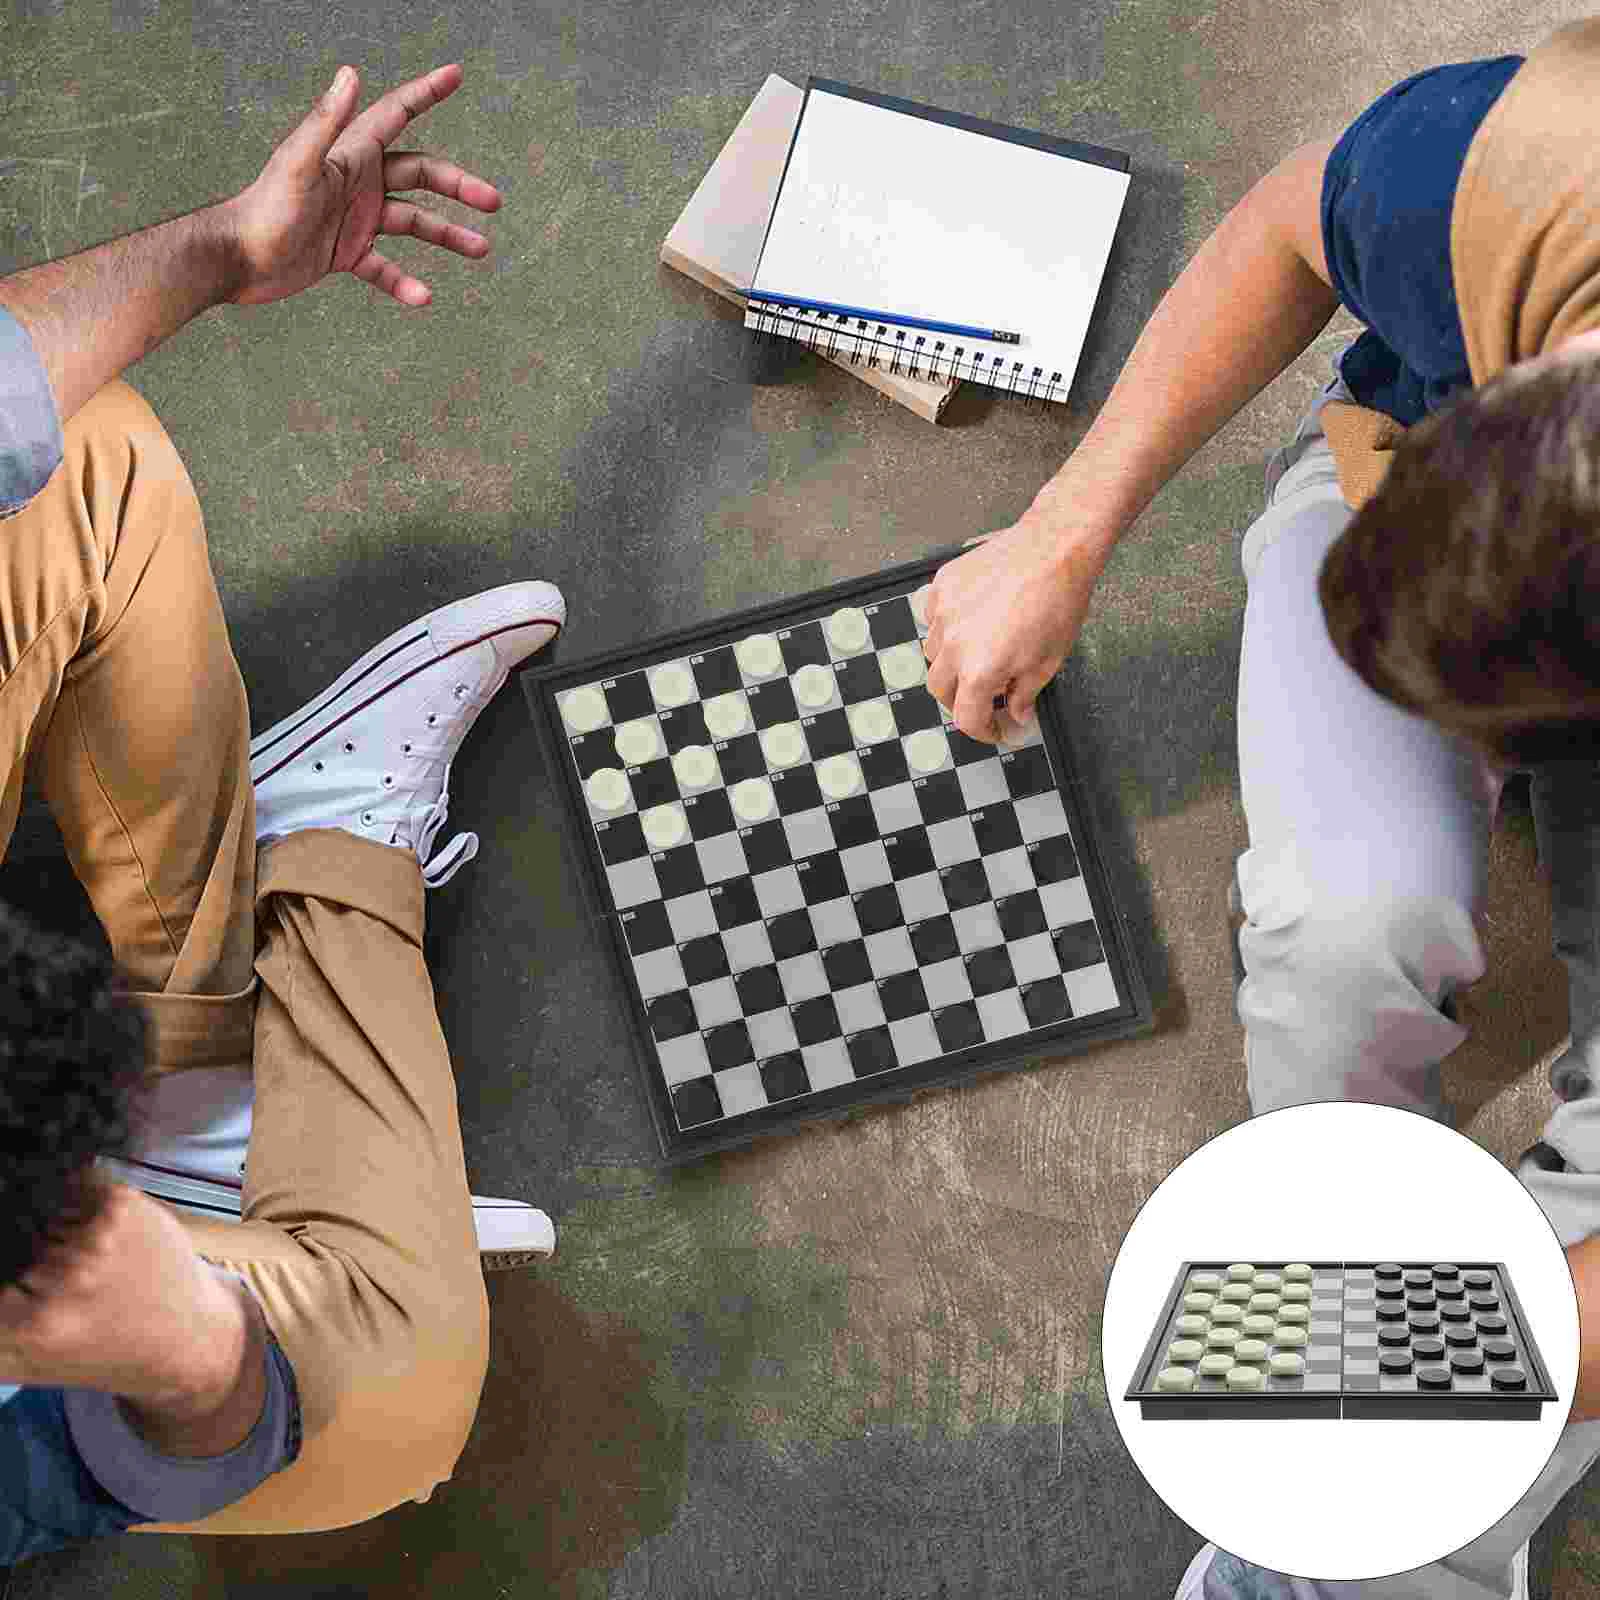 

Plastic International Checkers Foldable Board Game Beneficial Chess Games Recreational Game Supply Entertainment Accessory